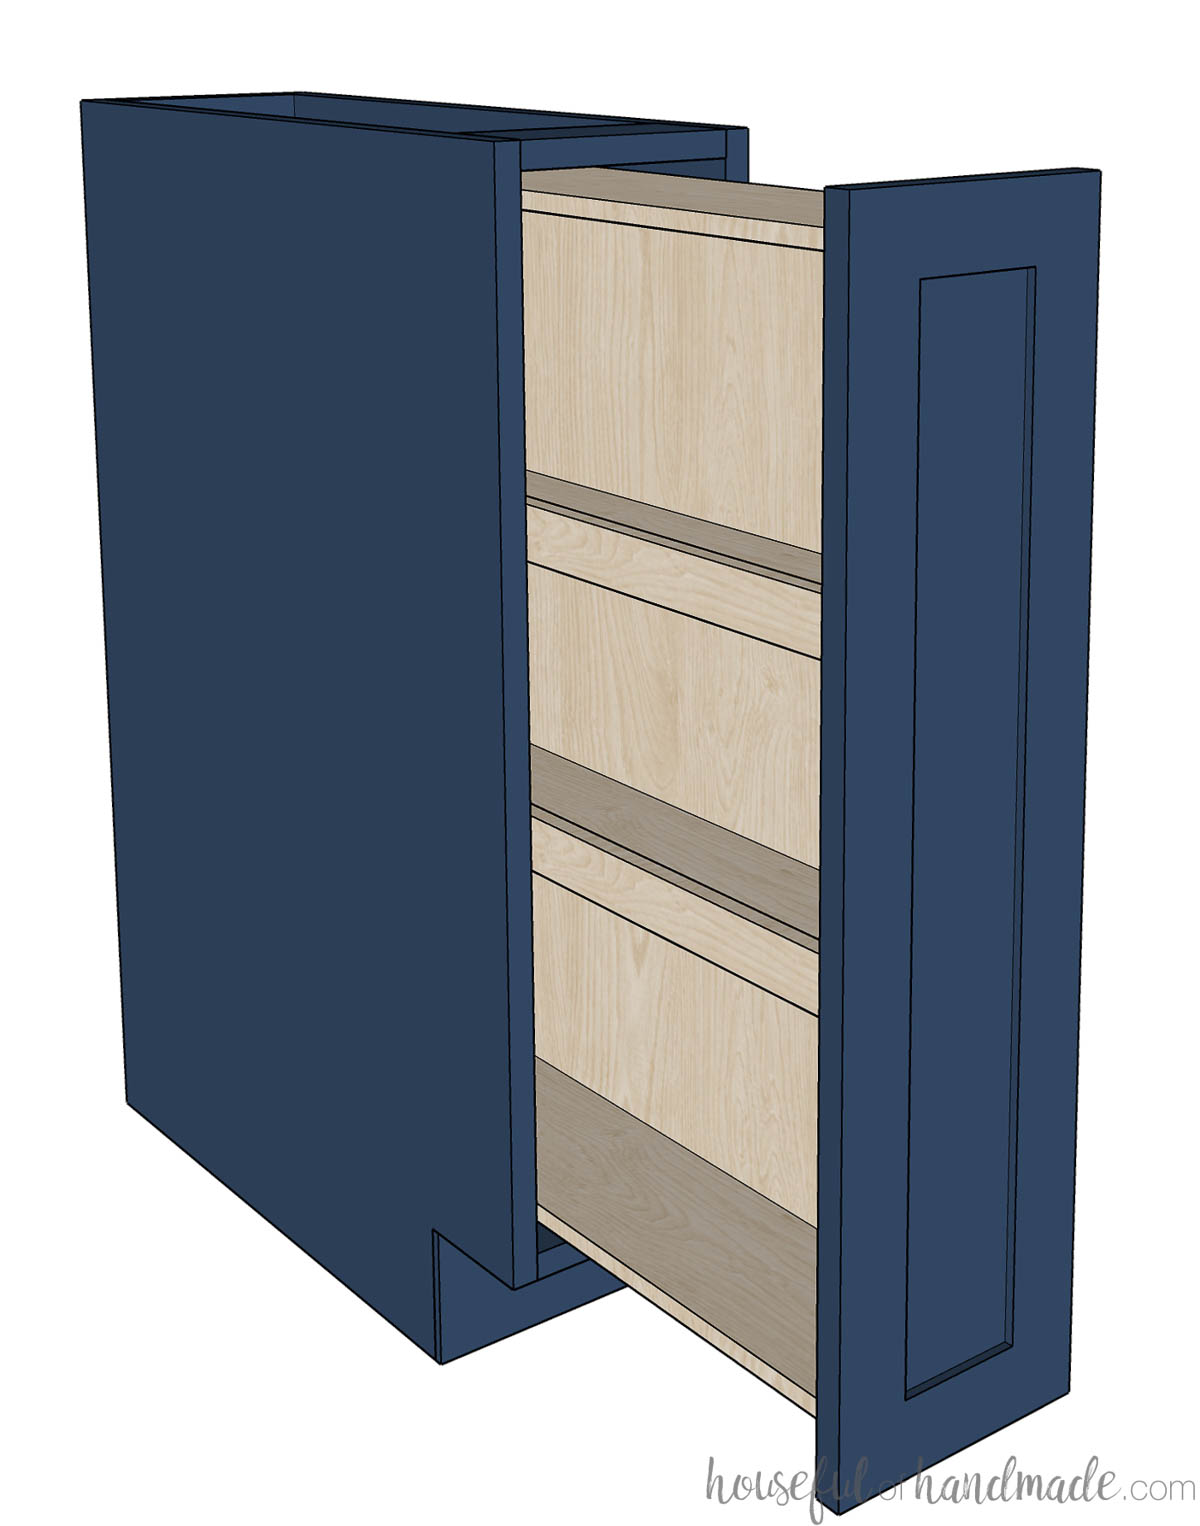 3D drawing of a navy spice cabinet with shelves. 